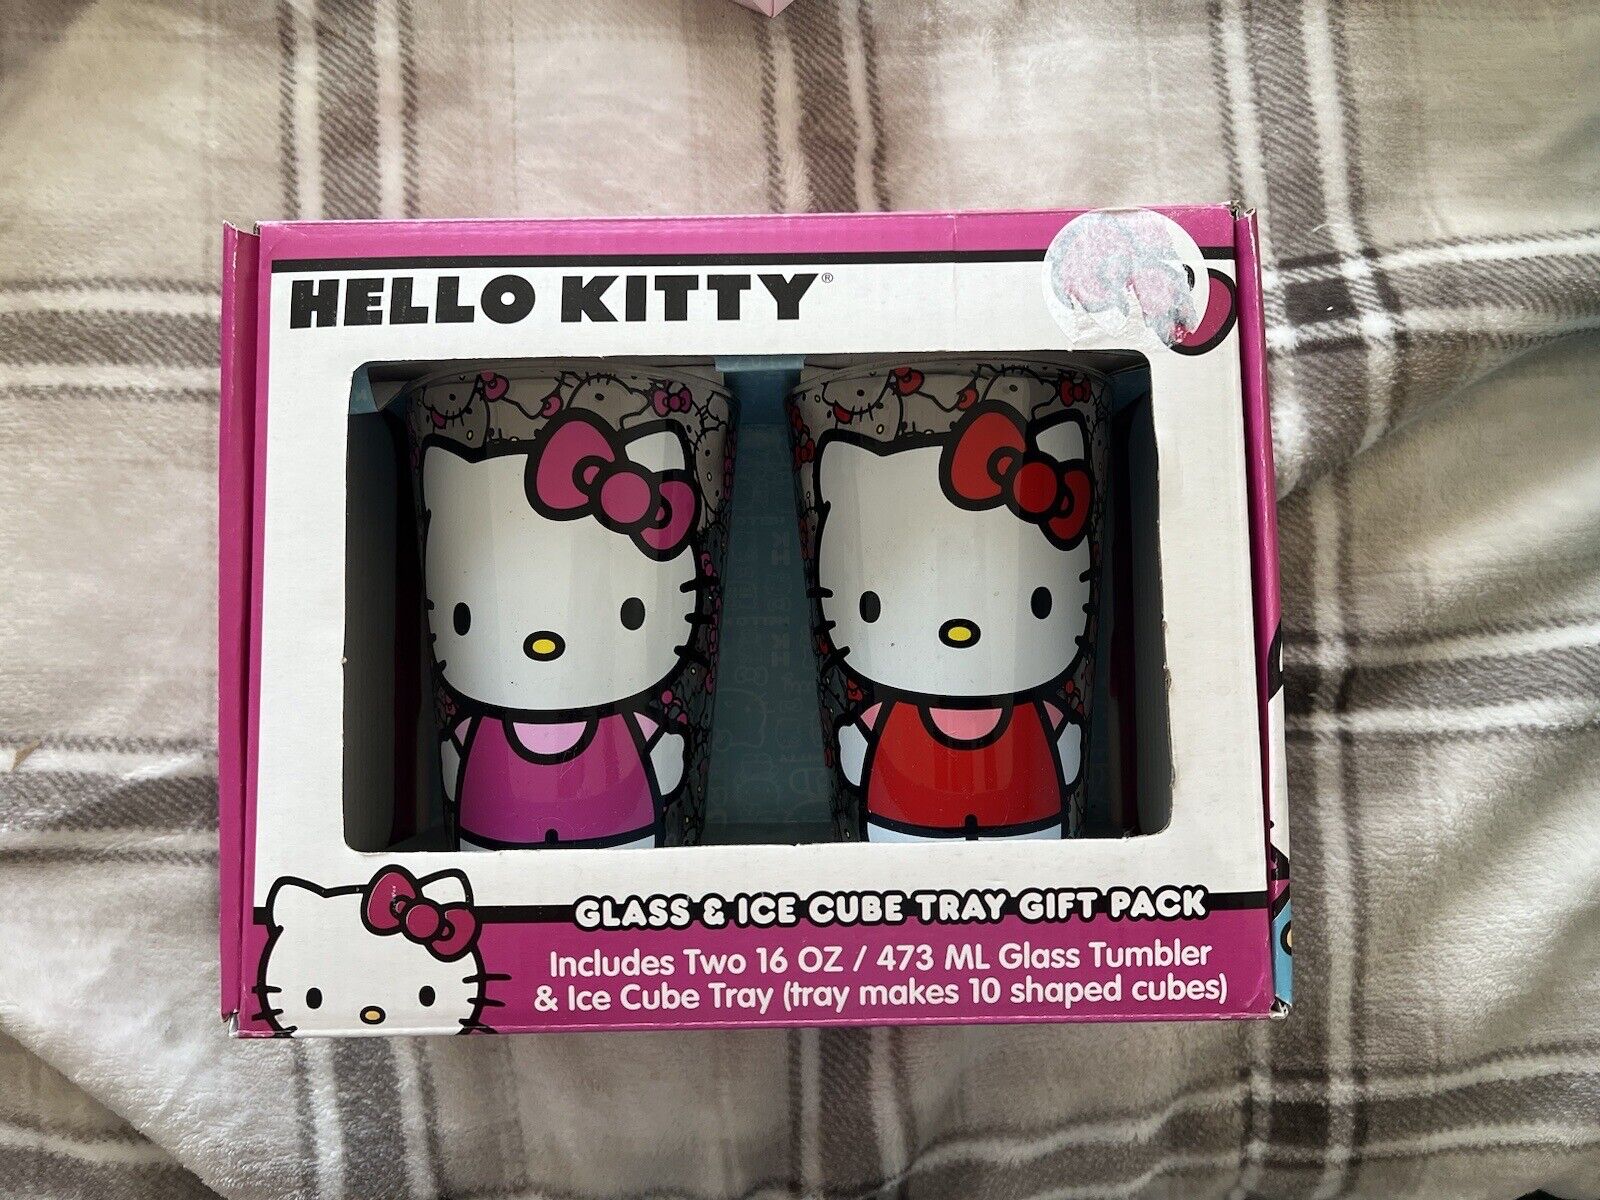 NEW NWB HELLO KITTY SANRIO  GLASS & ICE CUBE TRAY GIFT PACK 